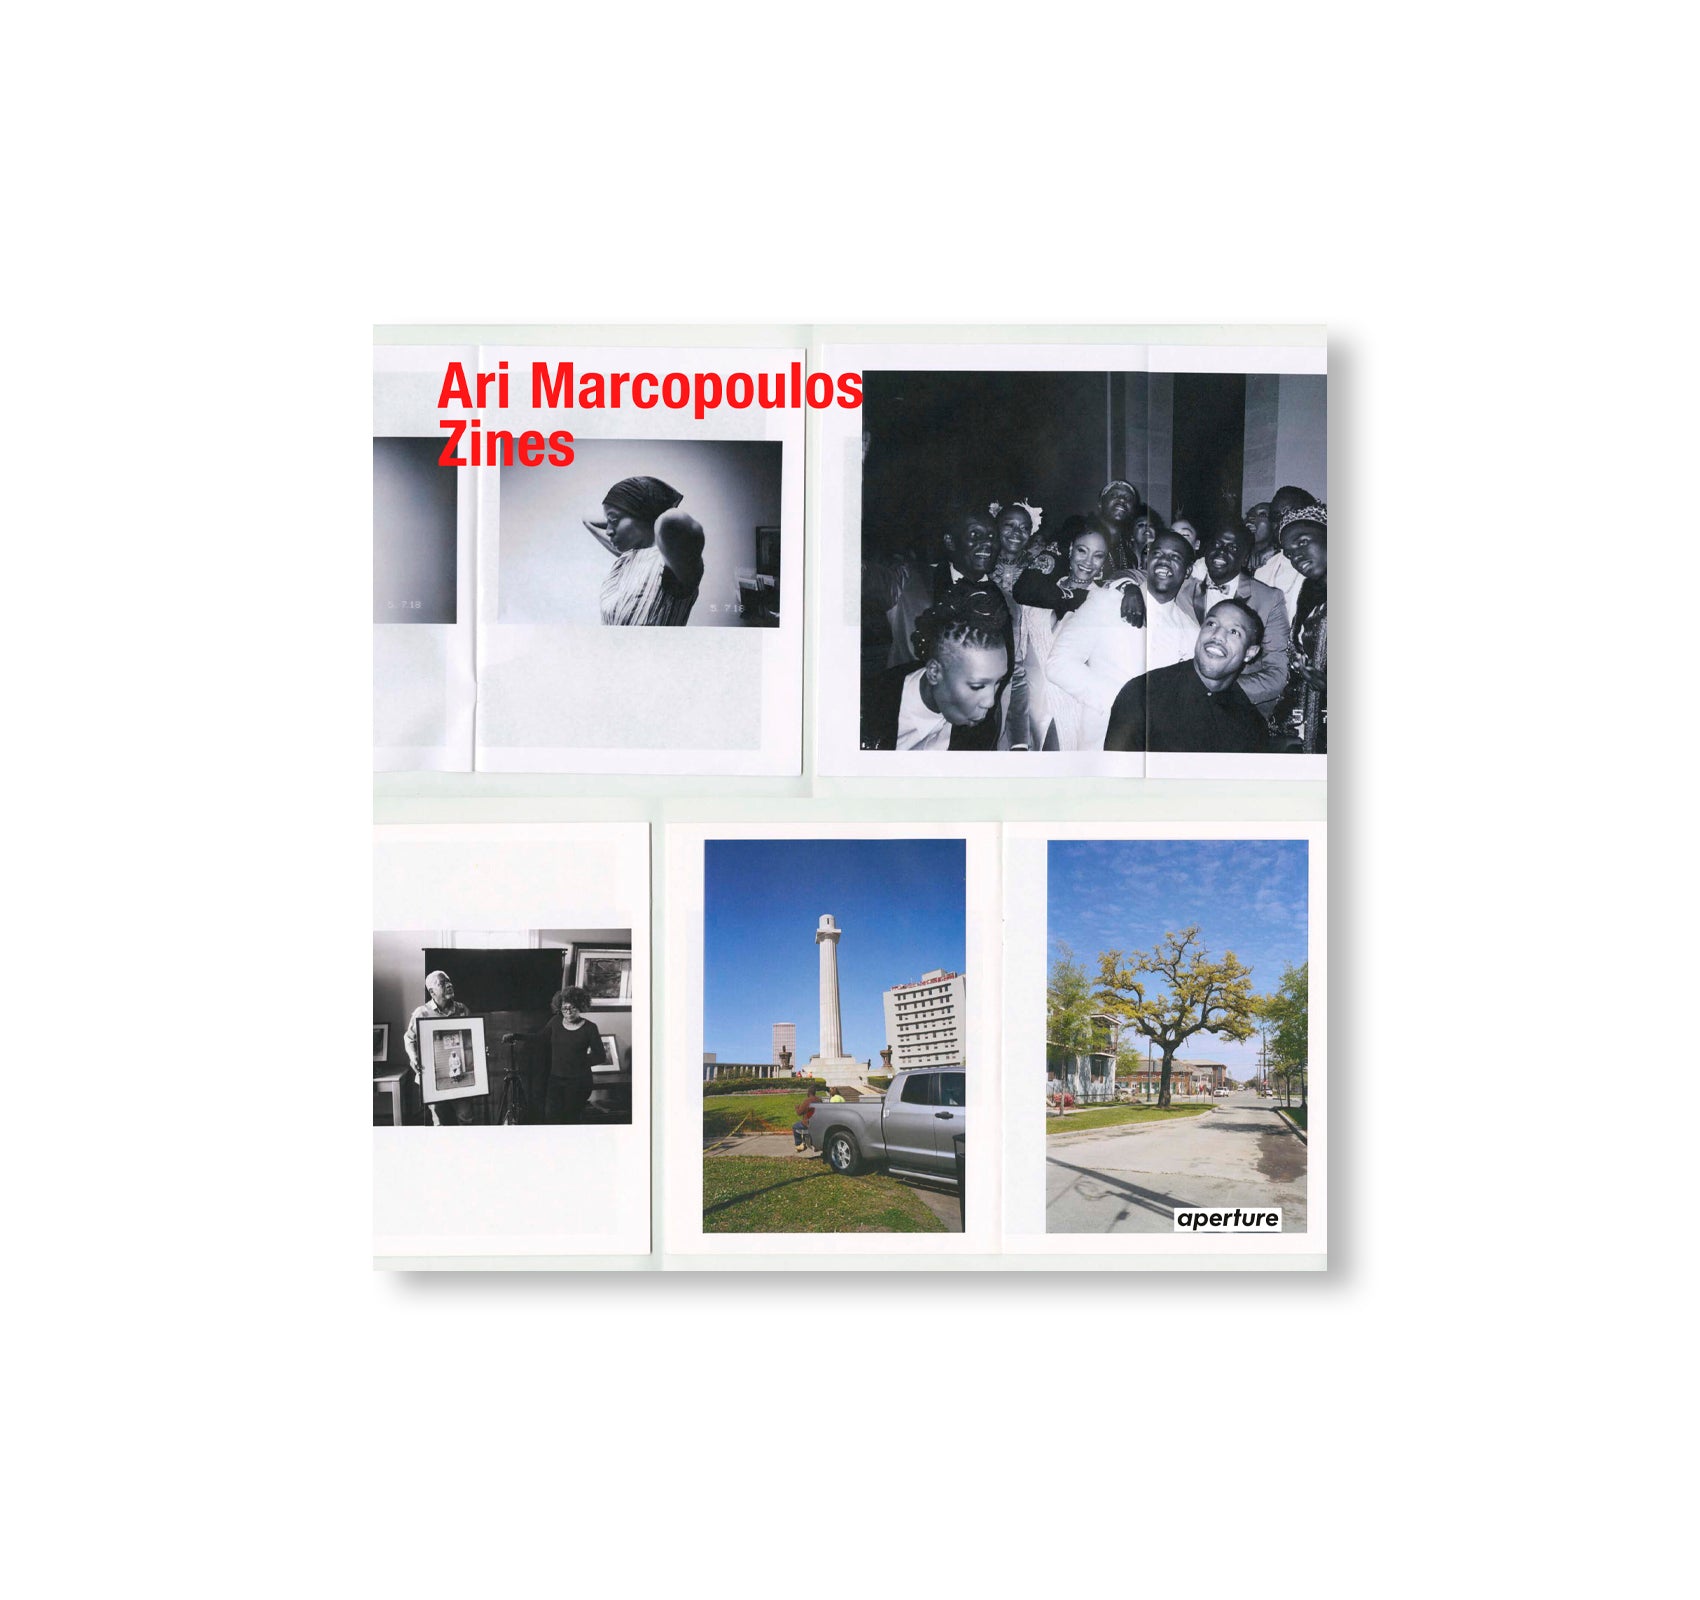 ARI MARCOPOULOS: ZINES by Ari Marcopoulos [SIGNED]